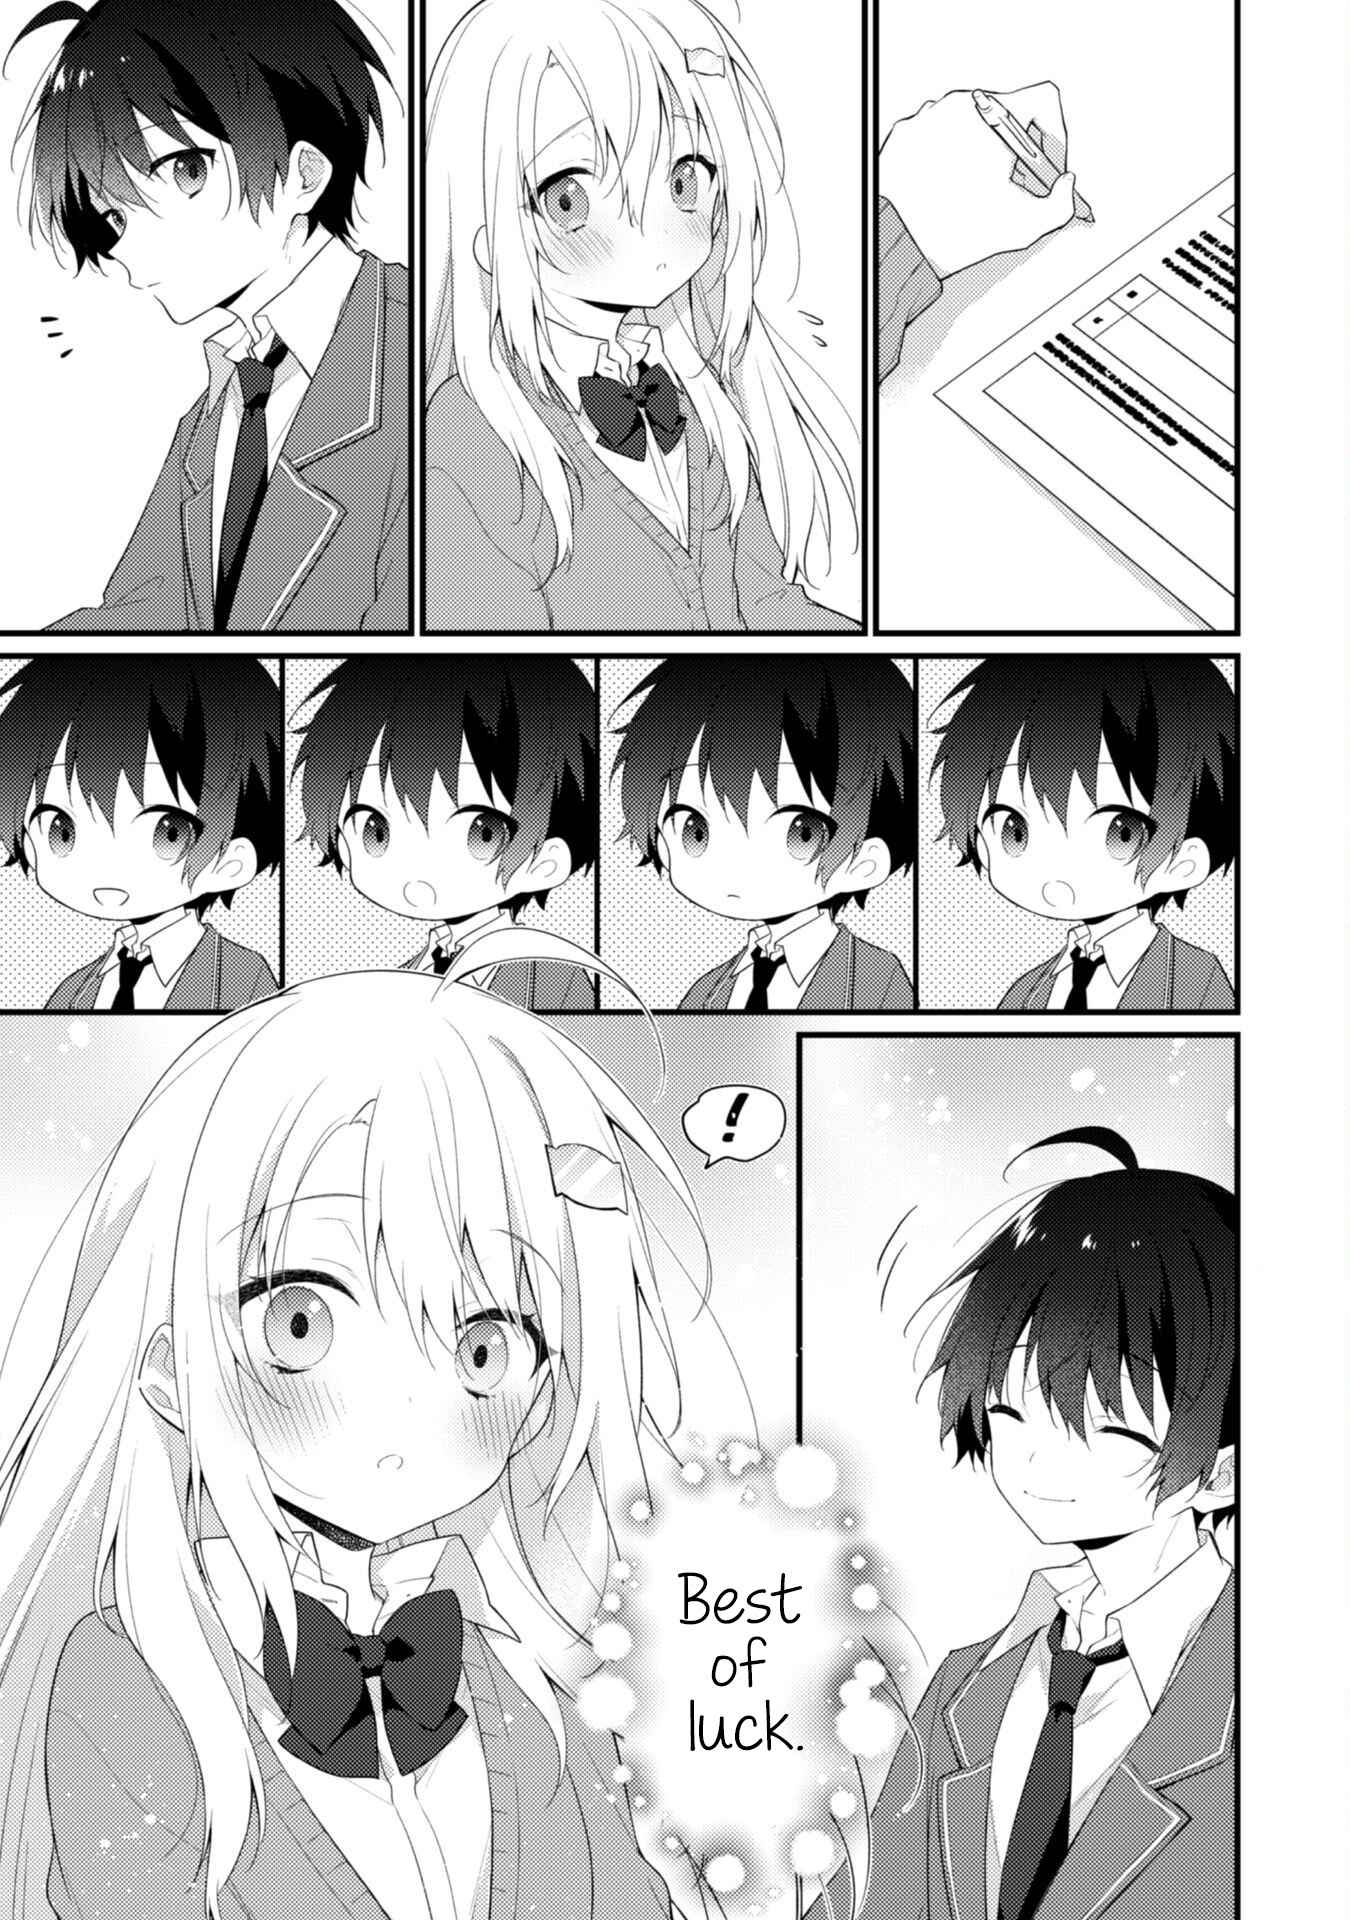 Shimotsuki-san Likes the Mob ~This Shy Girl is Only Sweet Towards Me~ Chapter 7-eng-li - Page 13